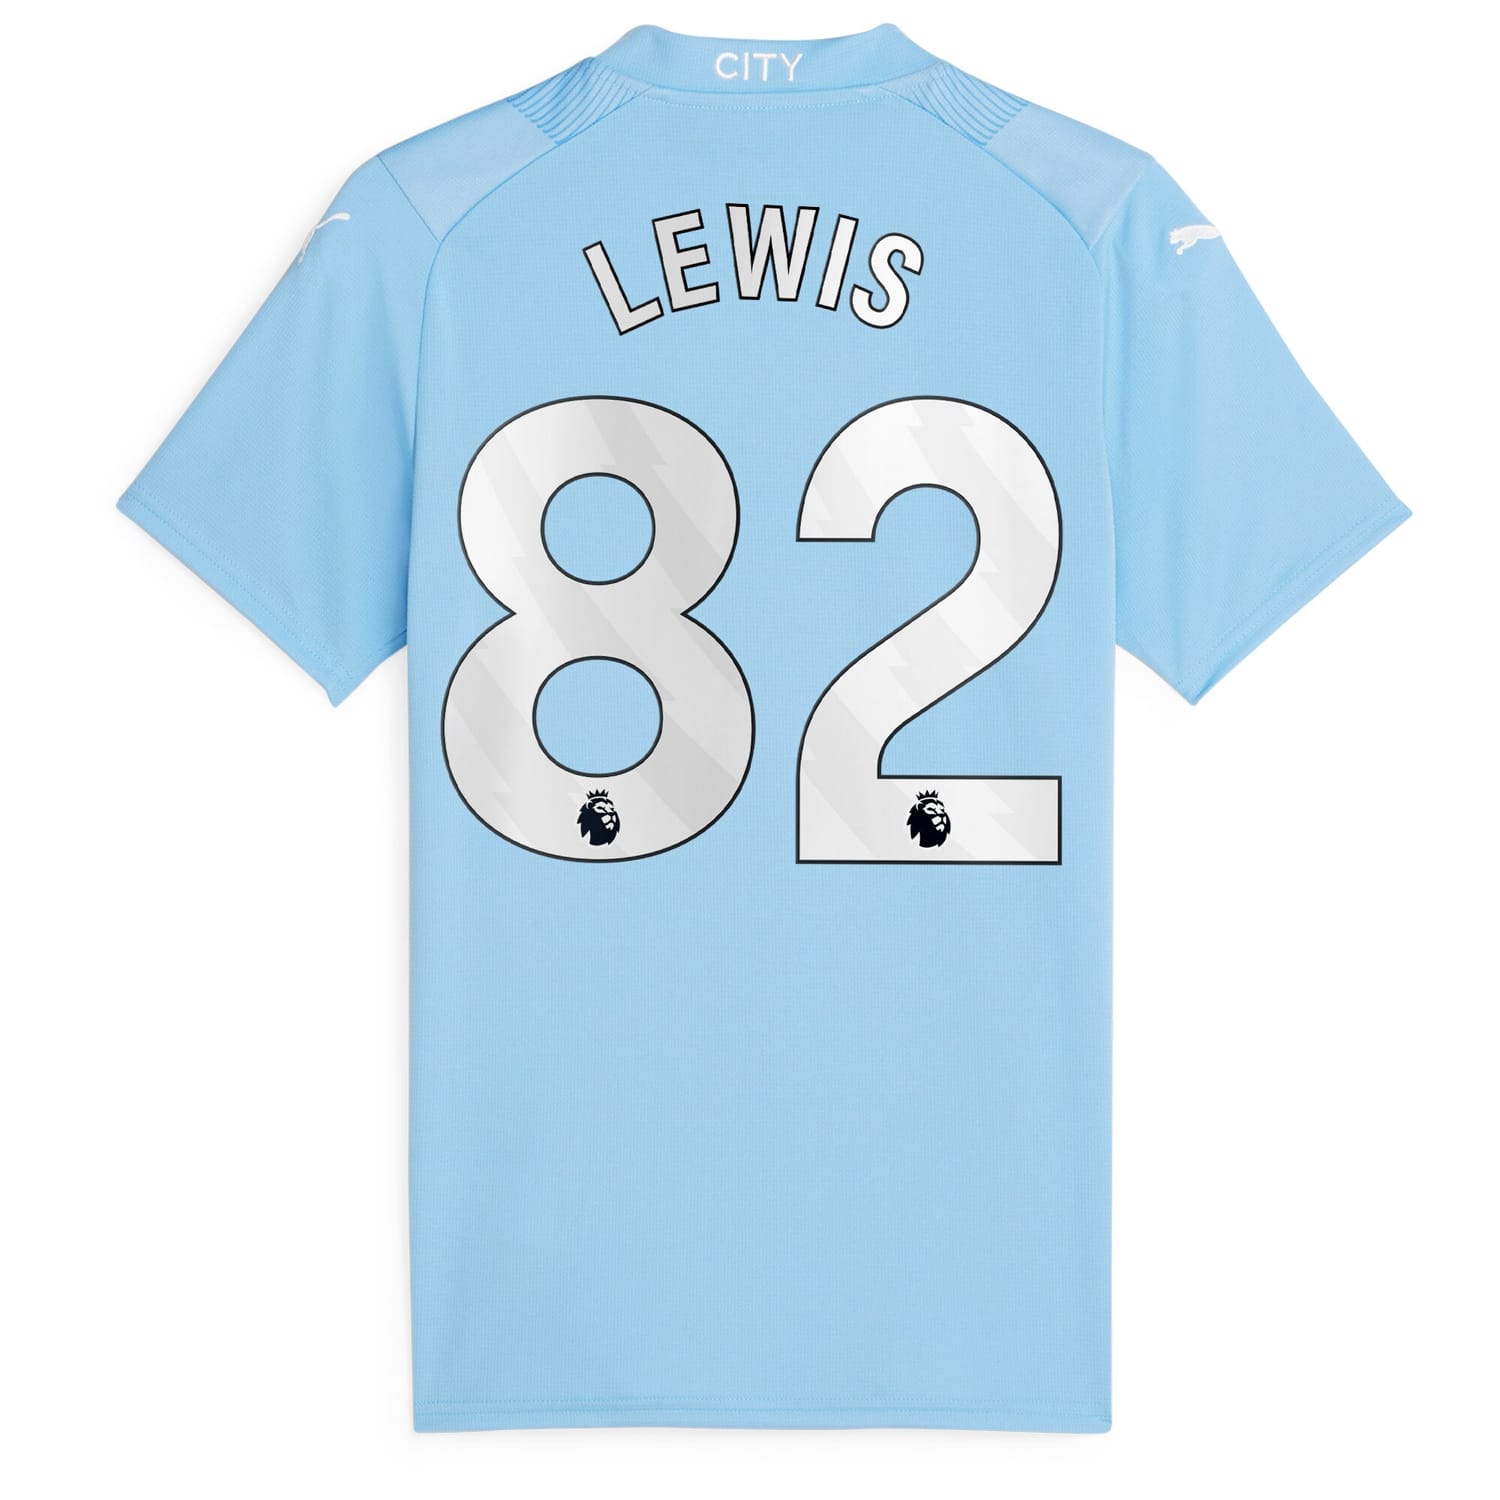 Premier League Manchester City Home Jersey Shirt 2023-24 player Lewis 82 printing for Women